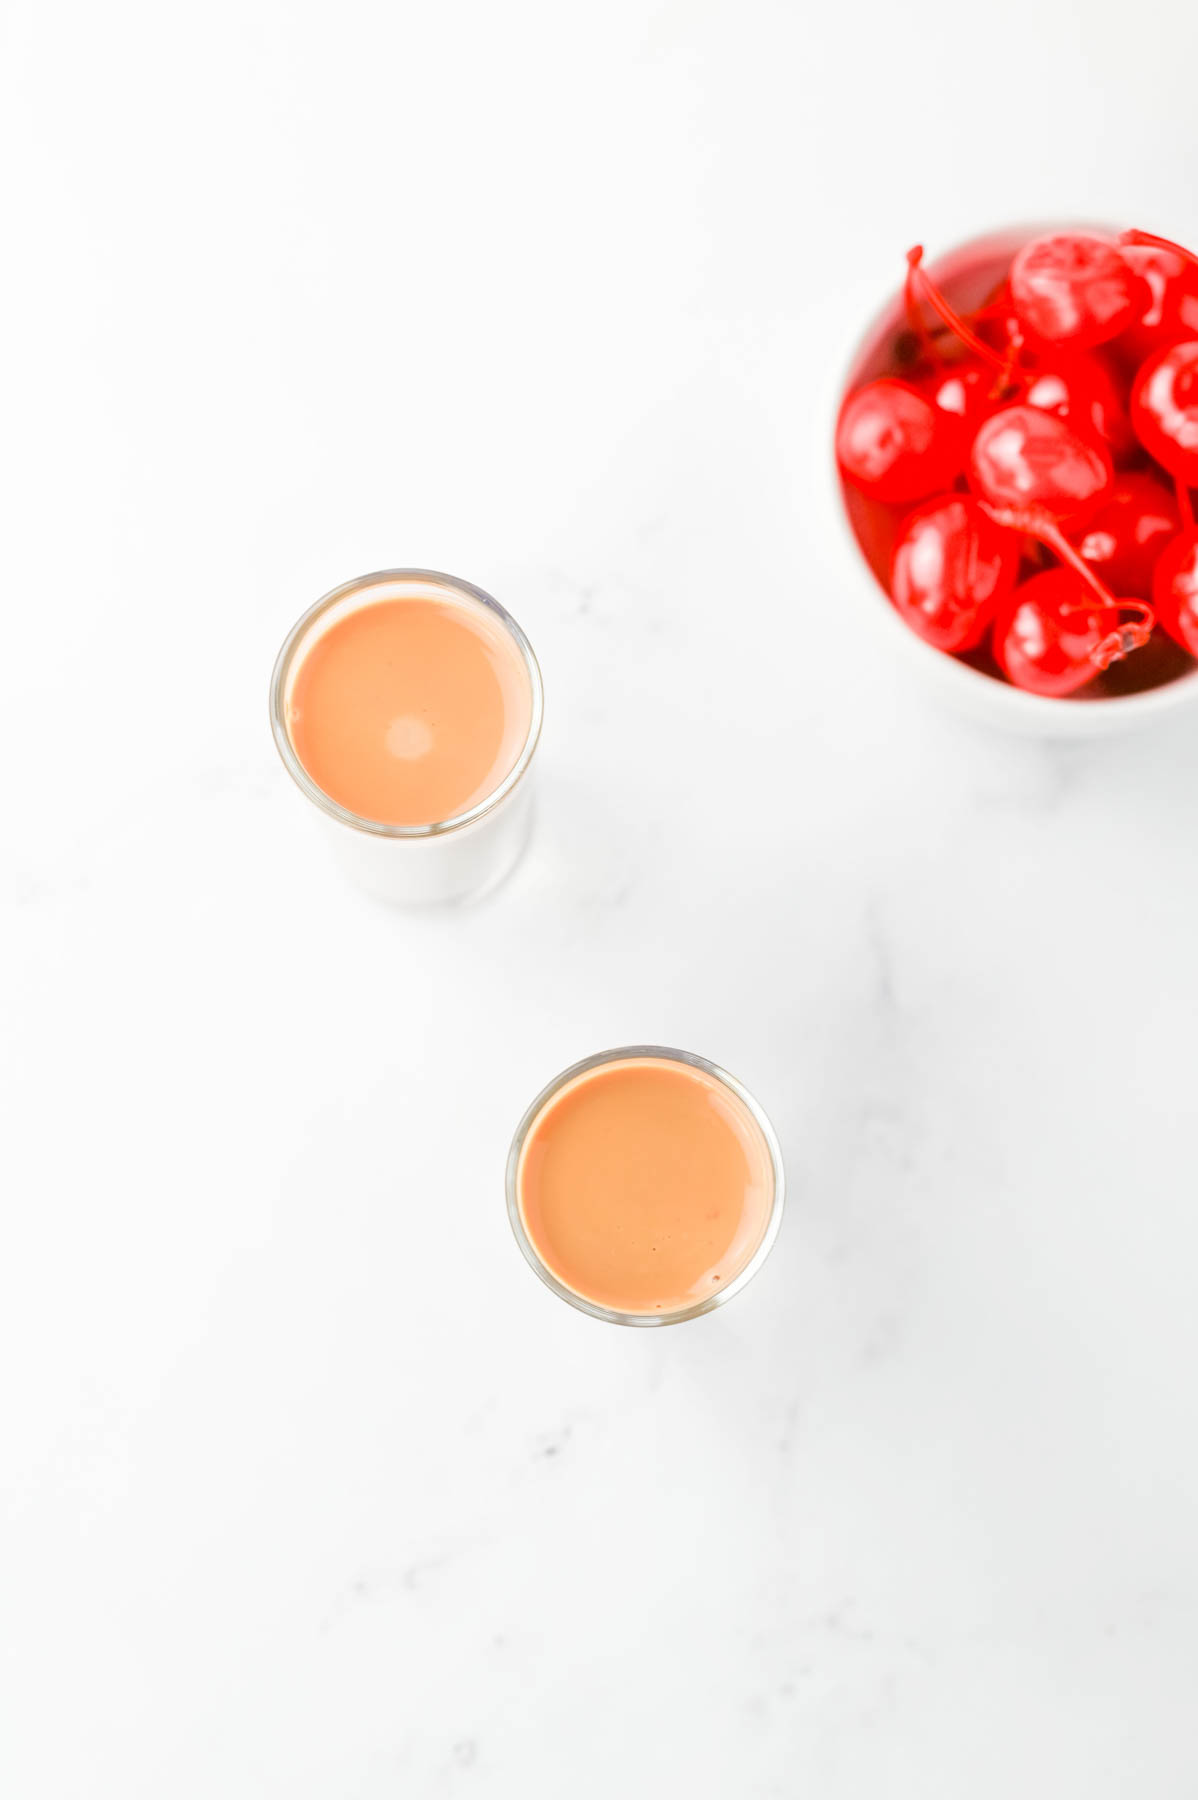 Chocolate cherry shots and a bowl of red cherries on a white table.